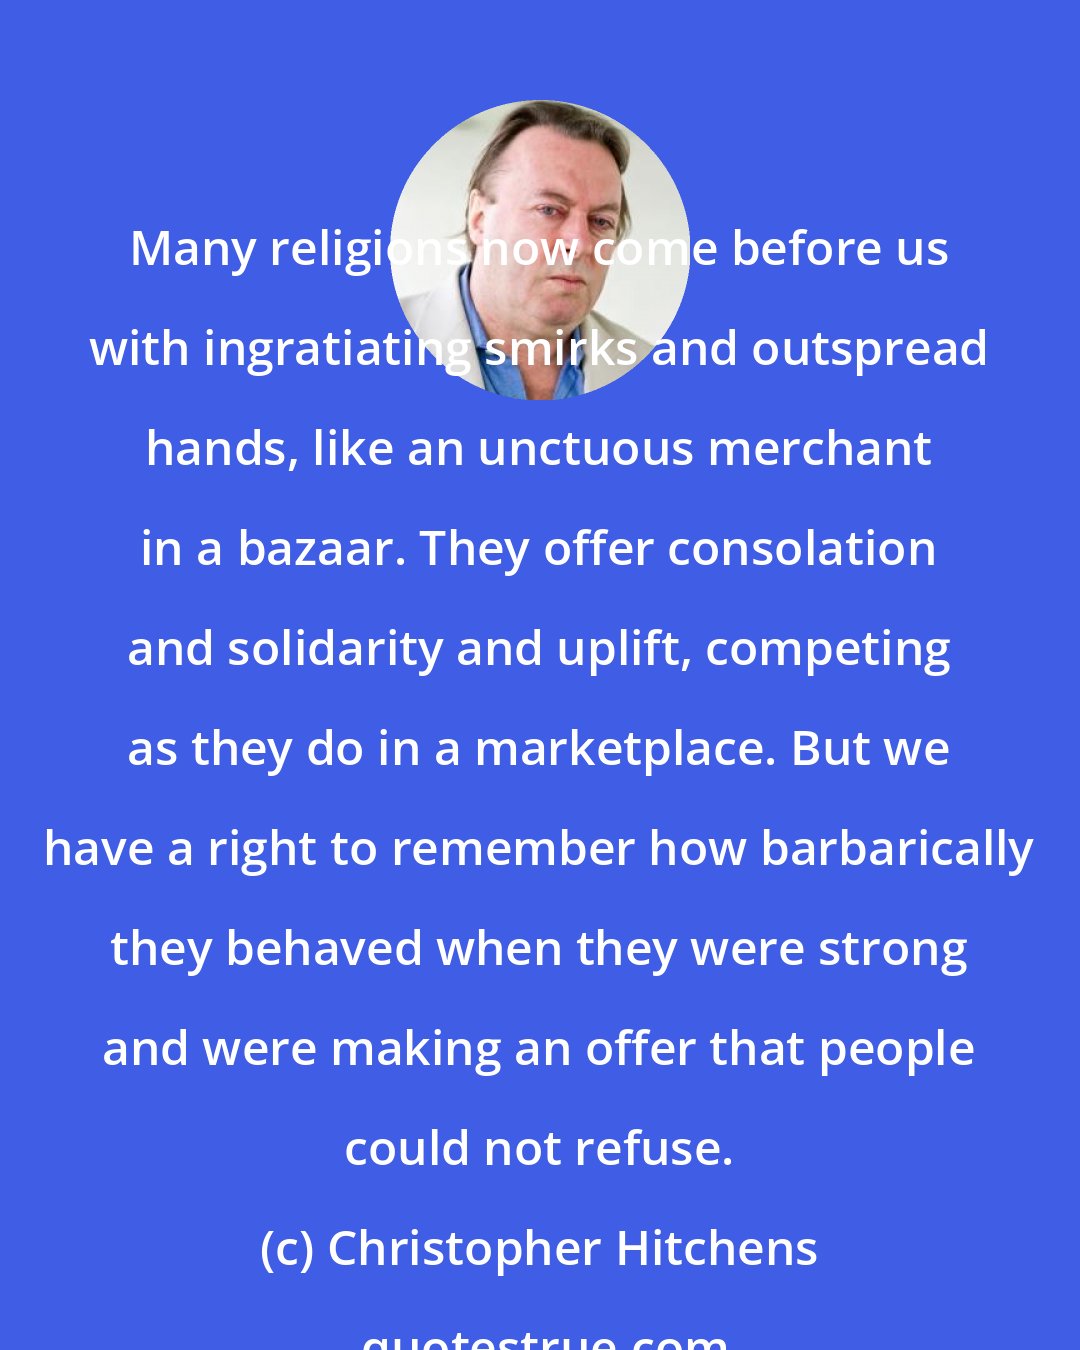 Christopher Hitchens: Many religions now come before us with ingratiating smirks and outspread hands, like an unctuous merchant in a bazaar. They offer consolation and solidarity and uplift, competing as they do in a marketplace. But we have a right to remember how barbarically they behaved when they were strong and were making an offer that people could not refuse.